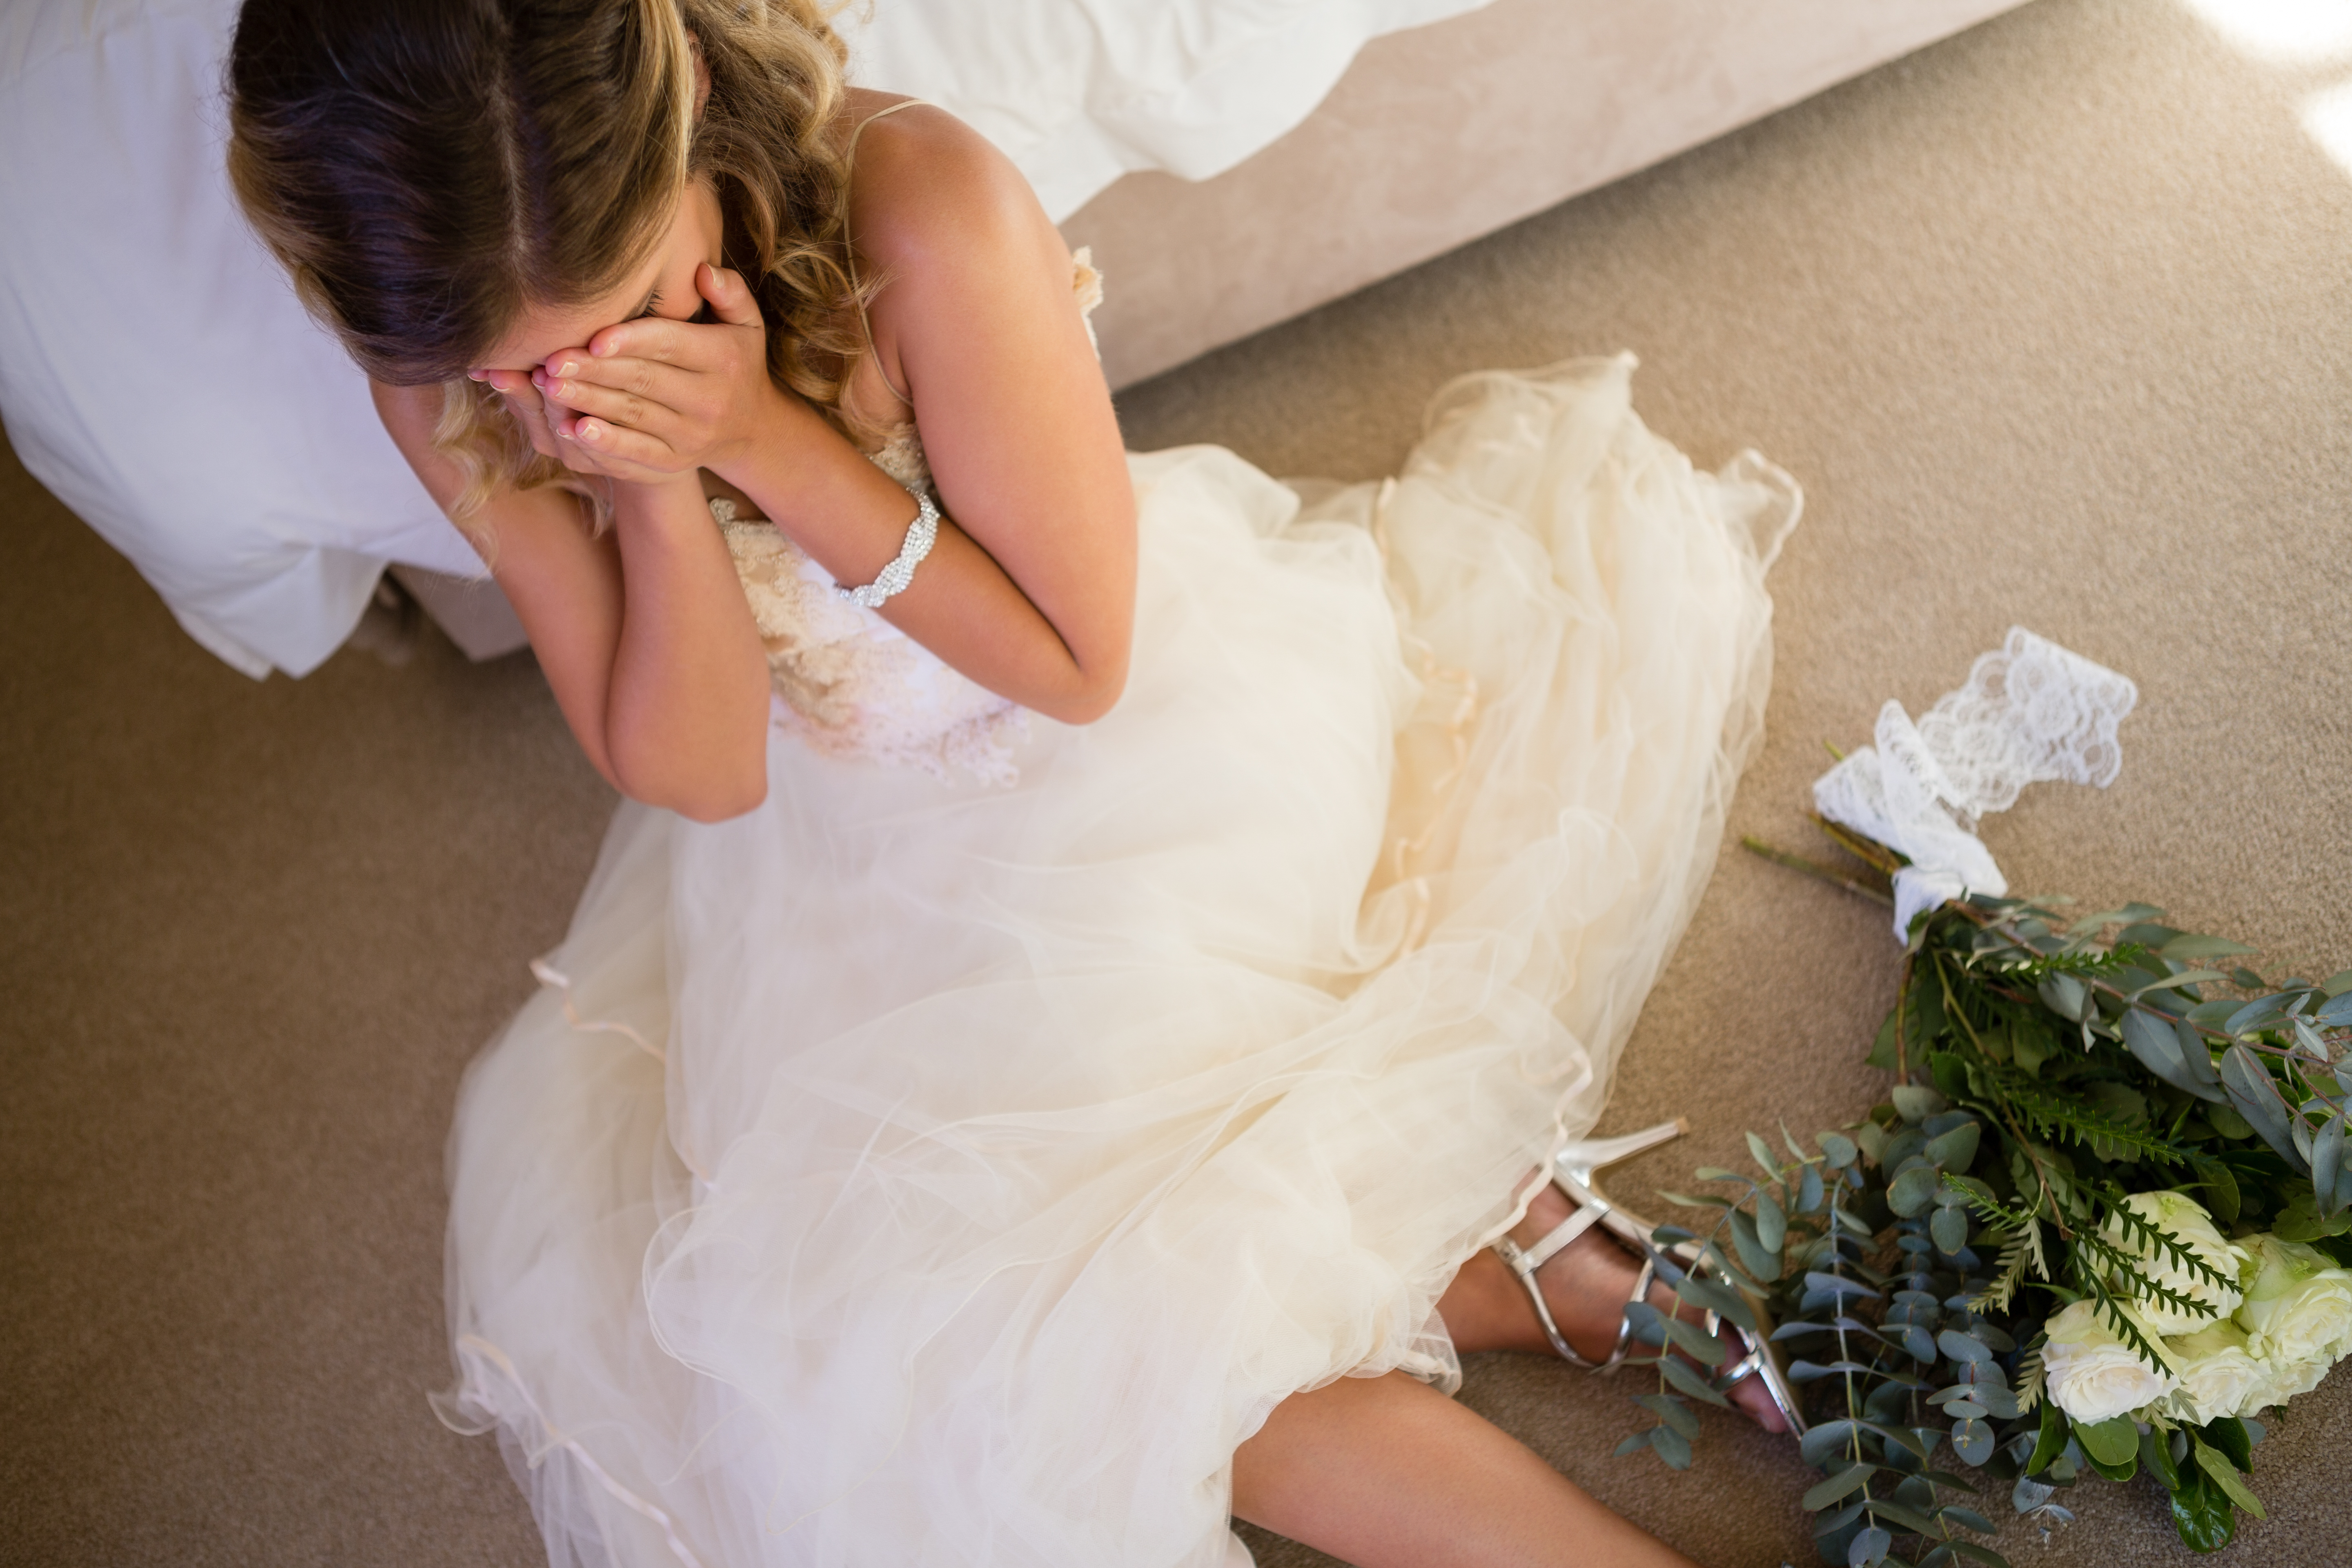 A bride sitting on the floor crying | Source: Shutterstock